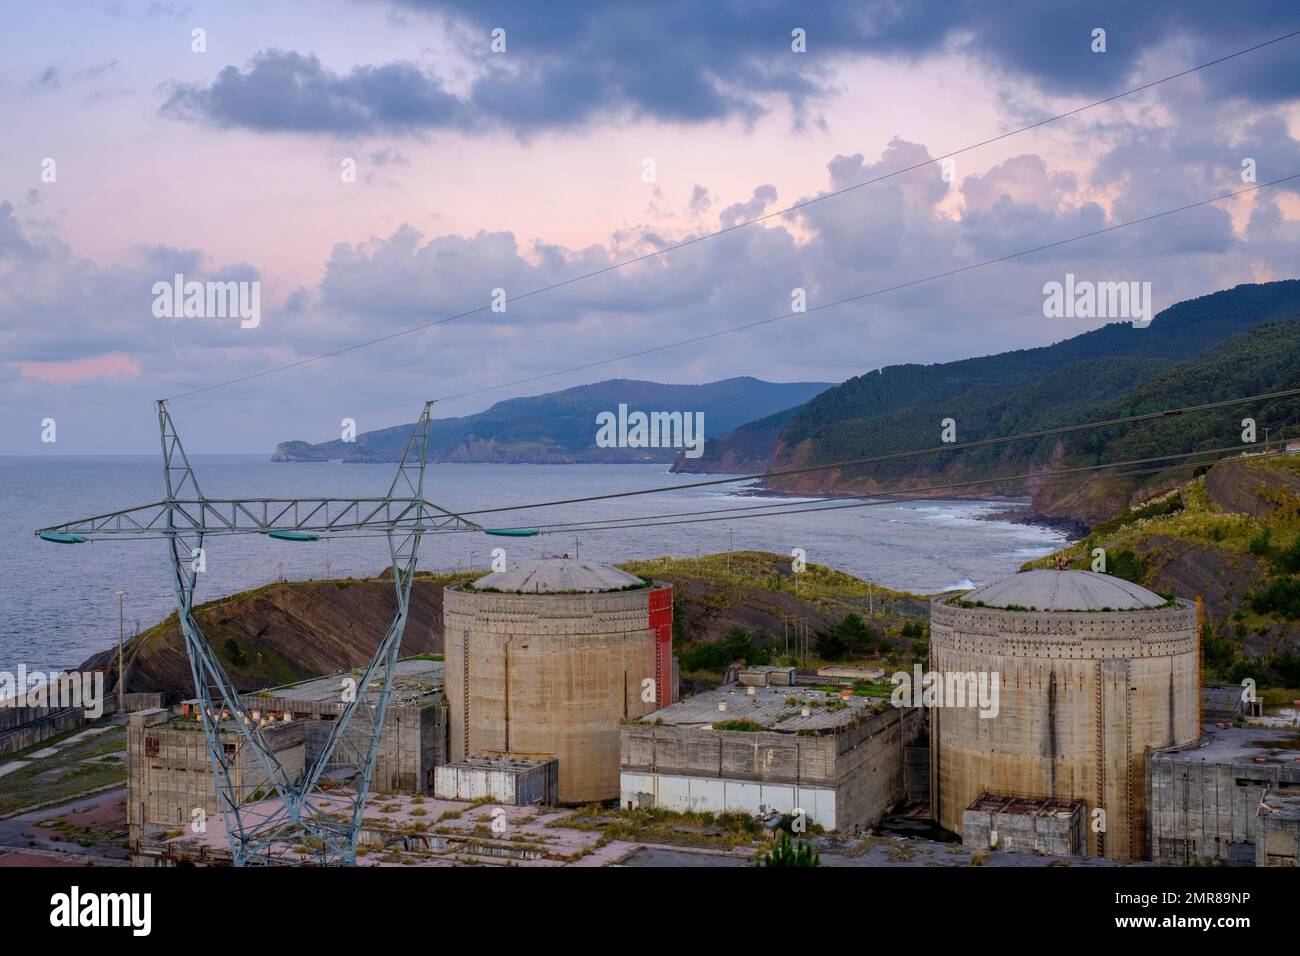 Former nuclear power plant, Lemóniz nuclear power plant, coast near Armintza, Bay of Biscay, Basque Country, Bizkaia Province, Bay of Biscay Province, Stock Photo